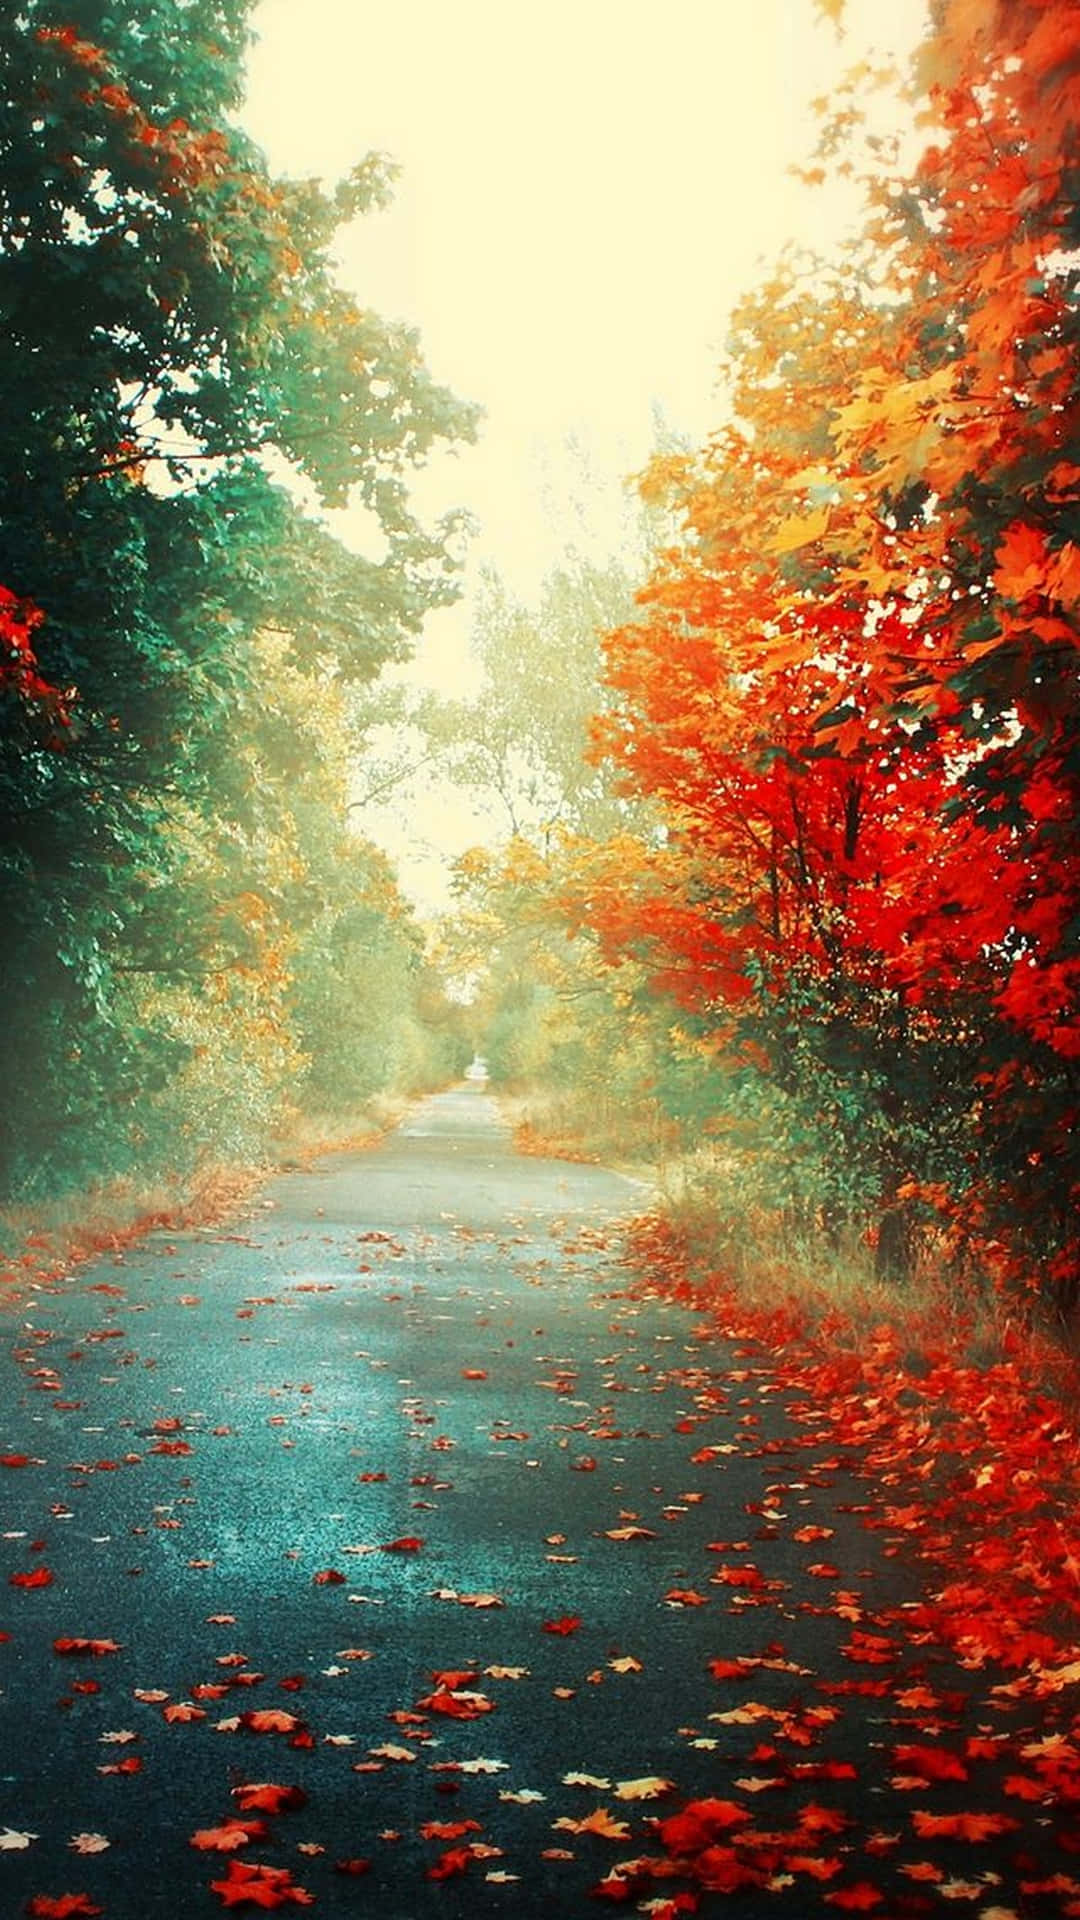 autumn leaves on a road Wallpaper